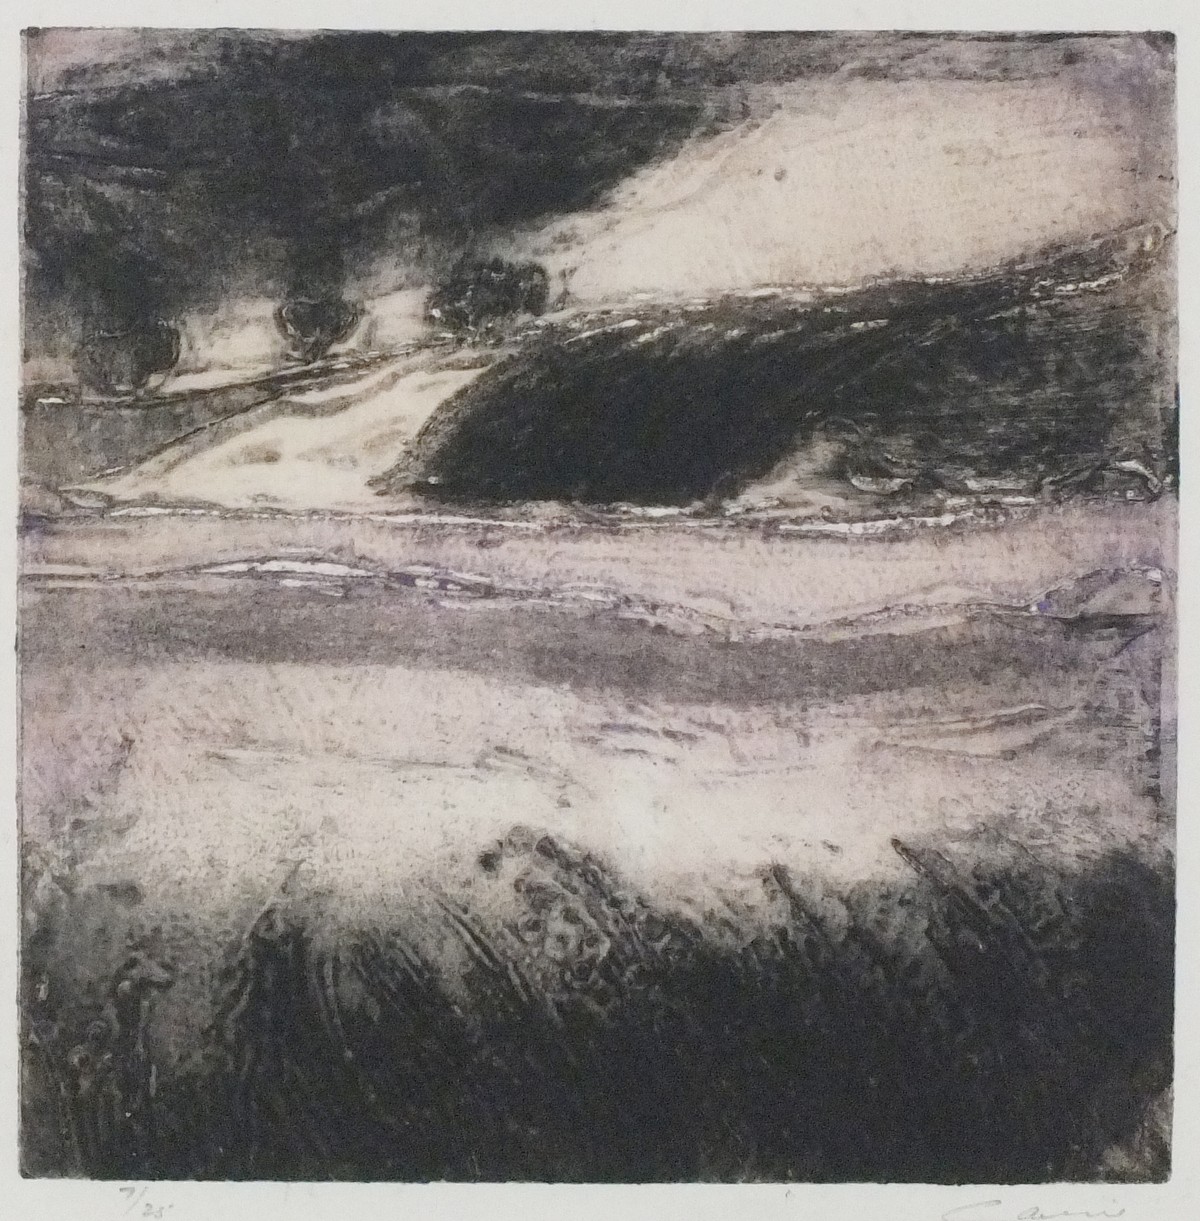 Ian LAURIE (British b. 1933) Loe Pool, Etching, Signed lower right, numbered 7/25, 7.5" x 7.5" (19cm